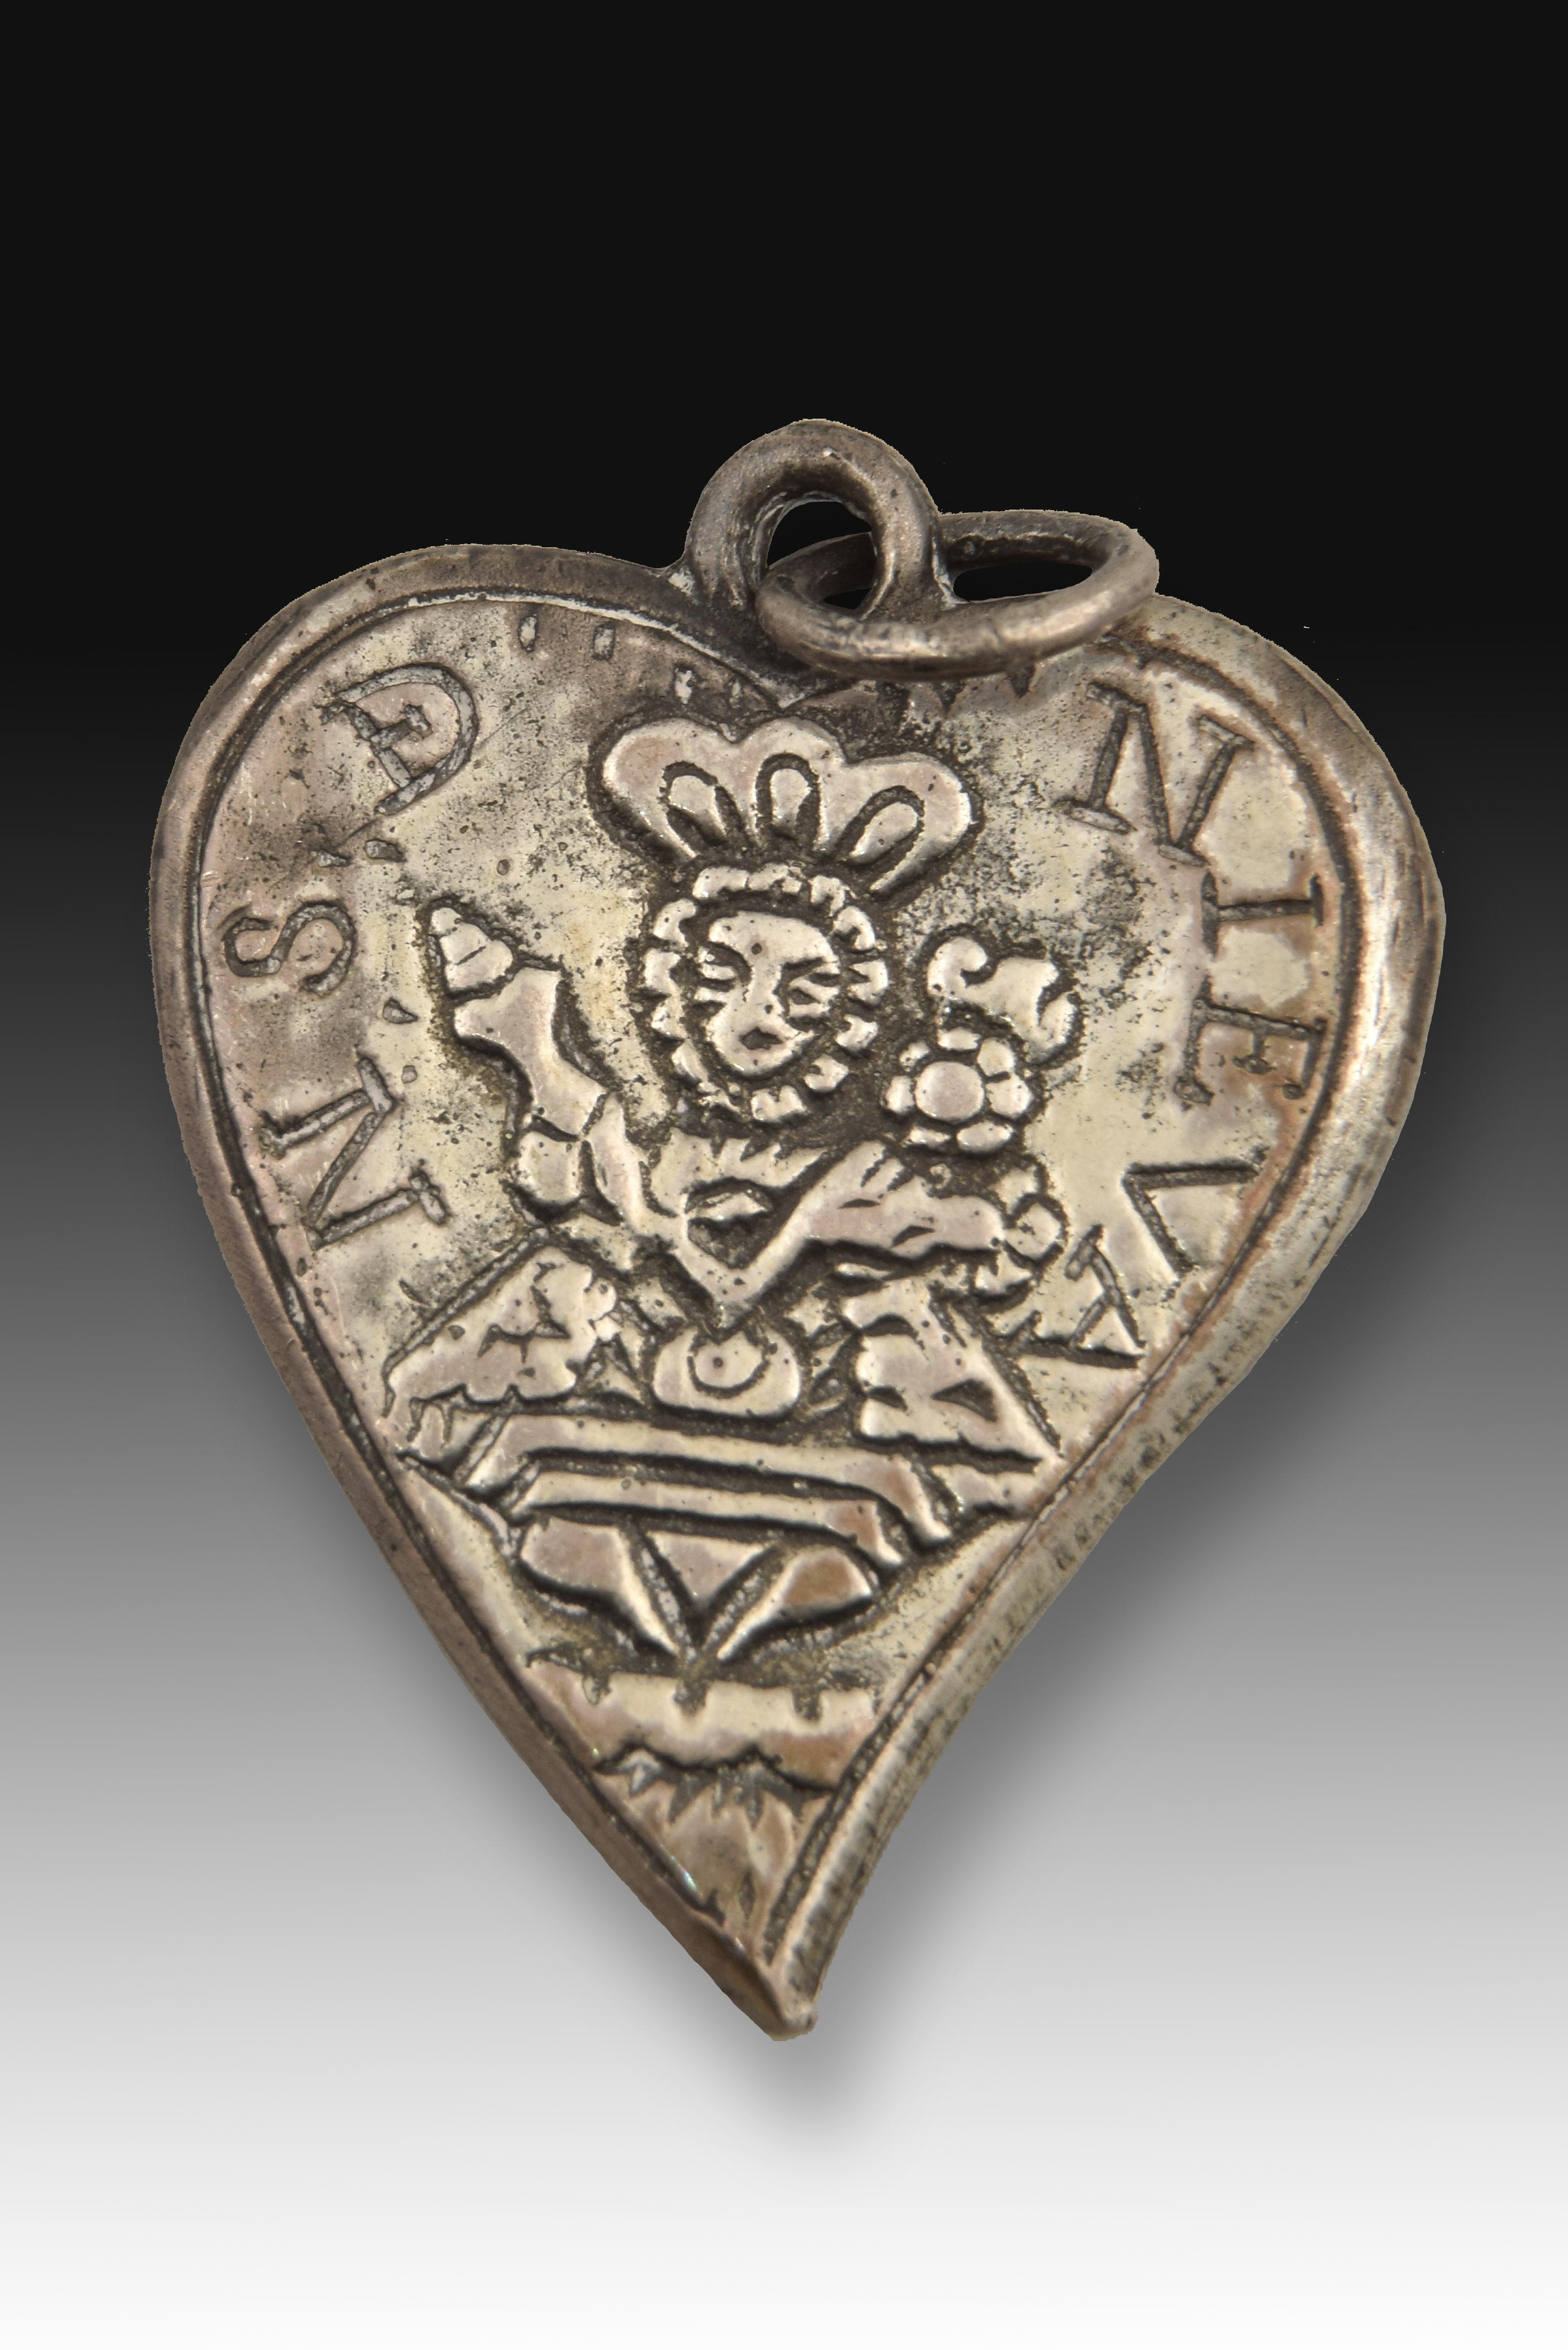 Baroque Silver Medal, Our Lady of Nieva and Domincan Cross, Spain, 17th Century